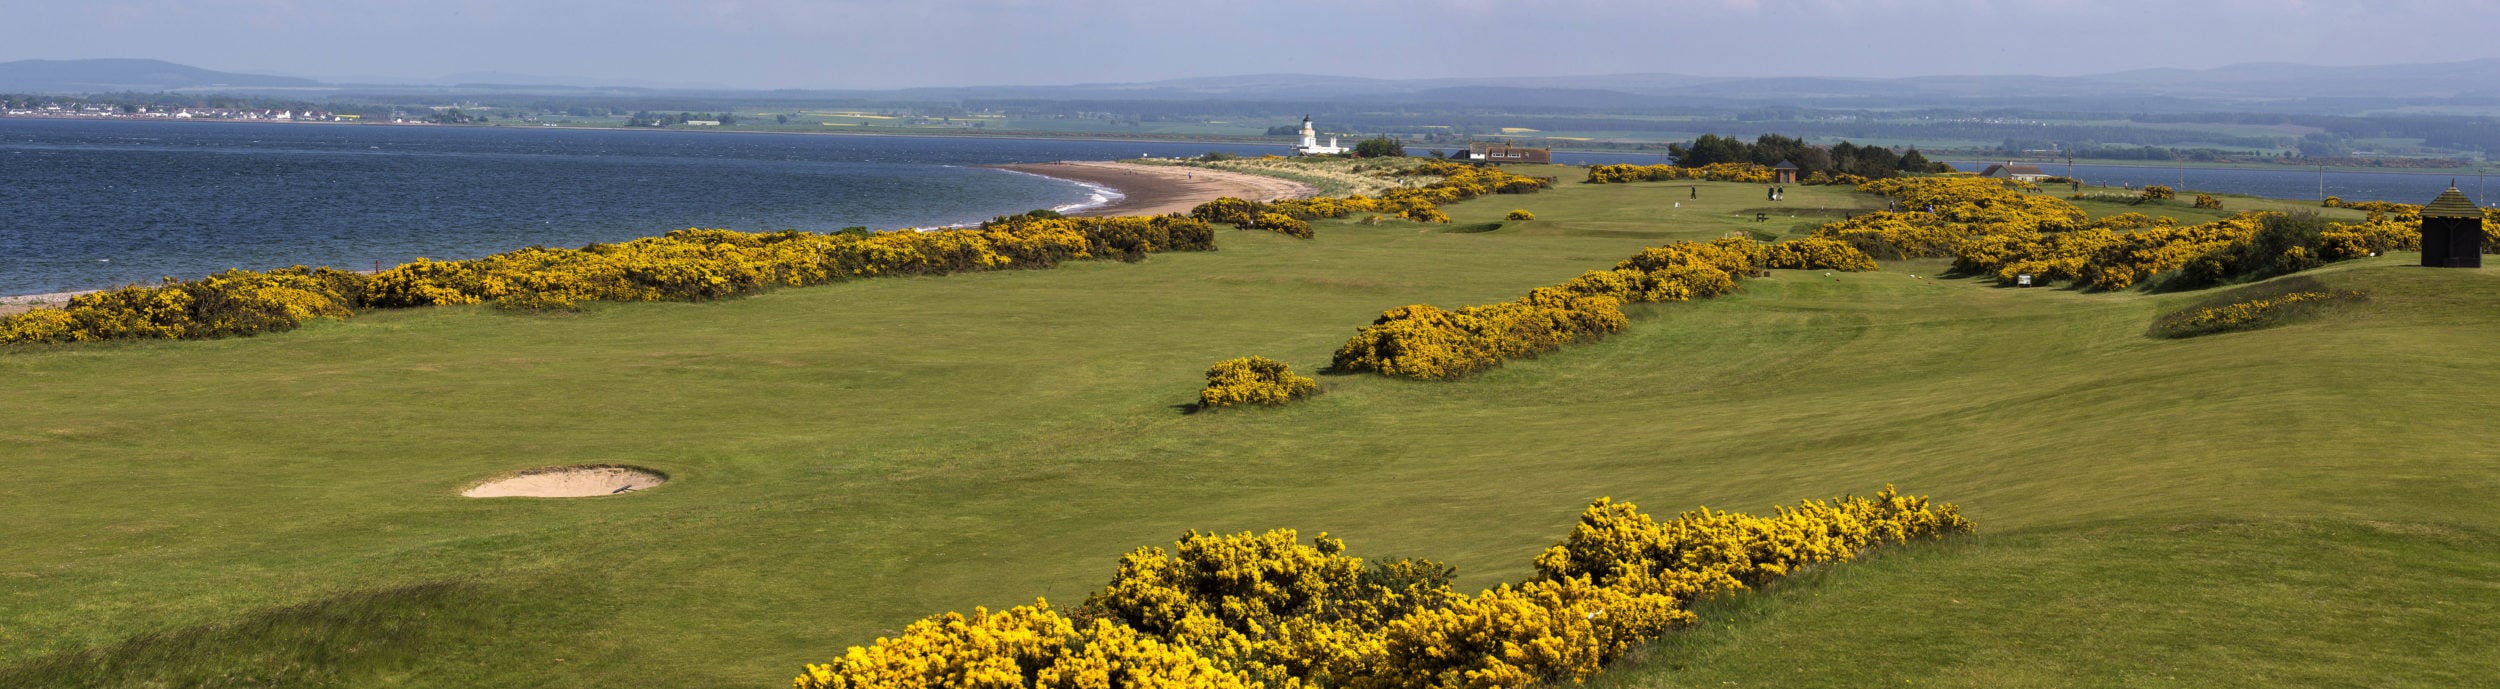 Image of the beach in the background and golf course in the foreground at Fortrose and Rosemarkie golf Links, Inverness, Scotland